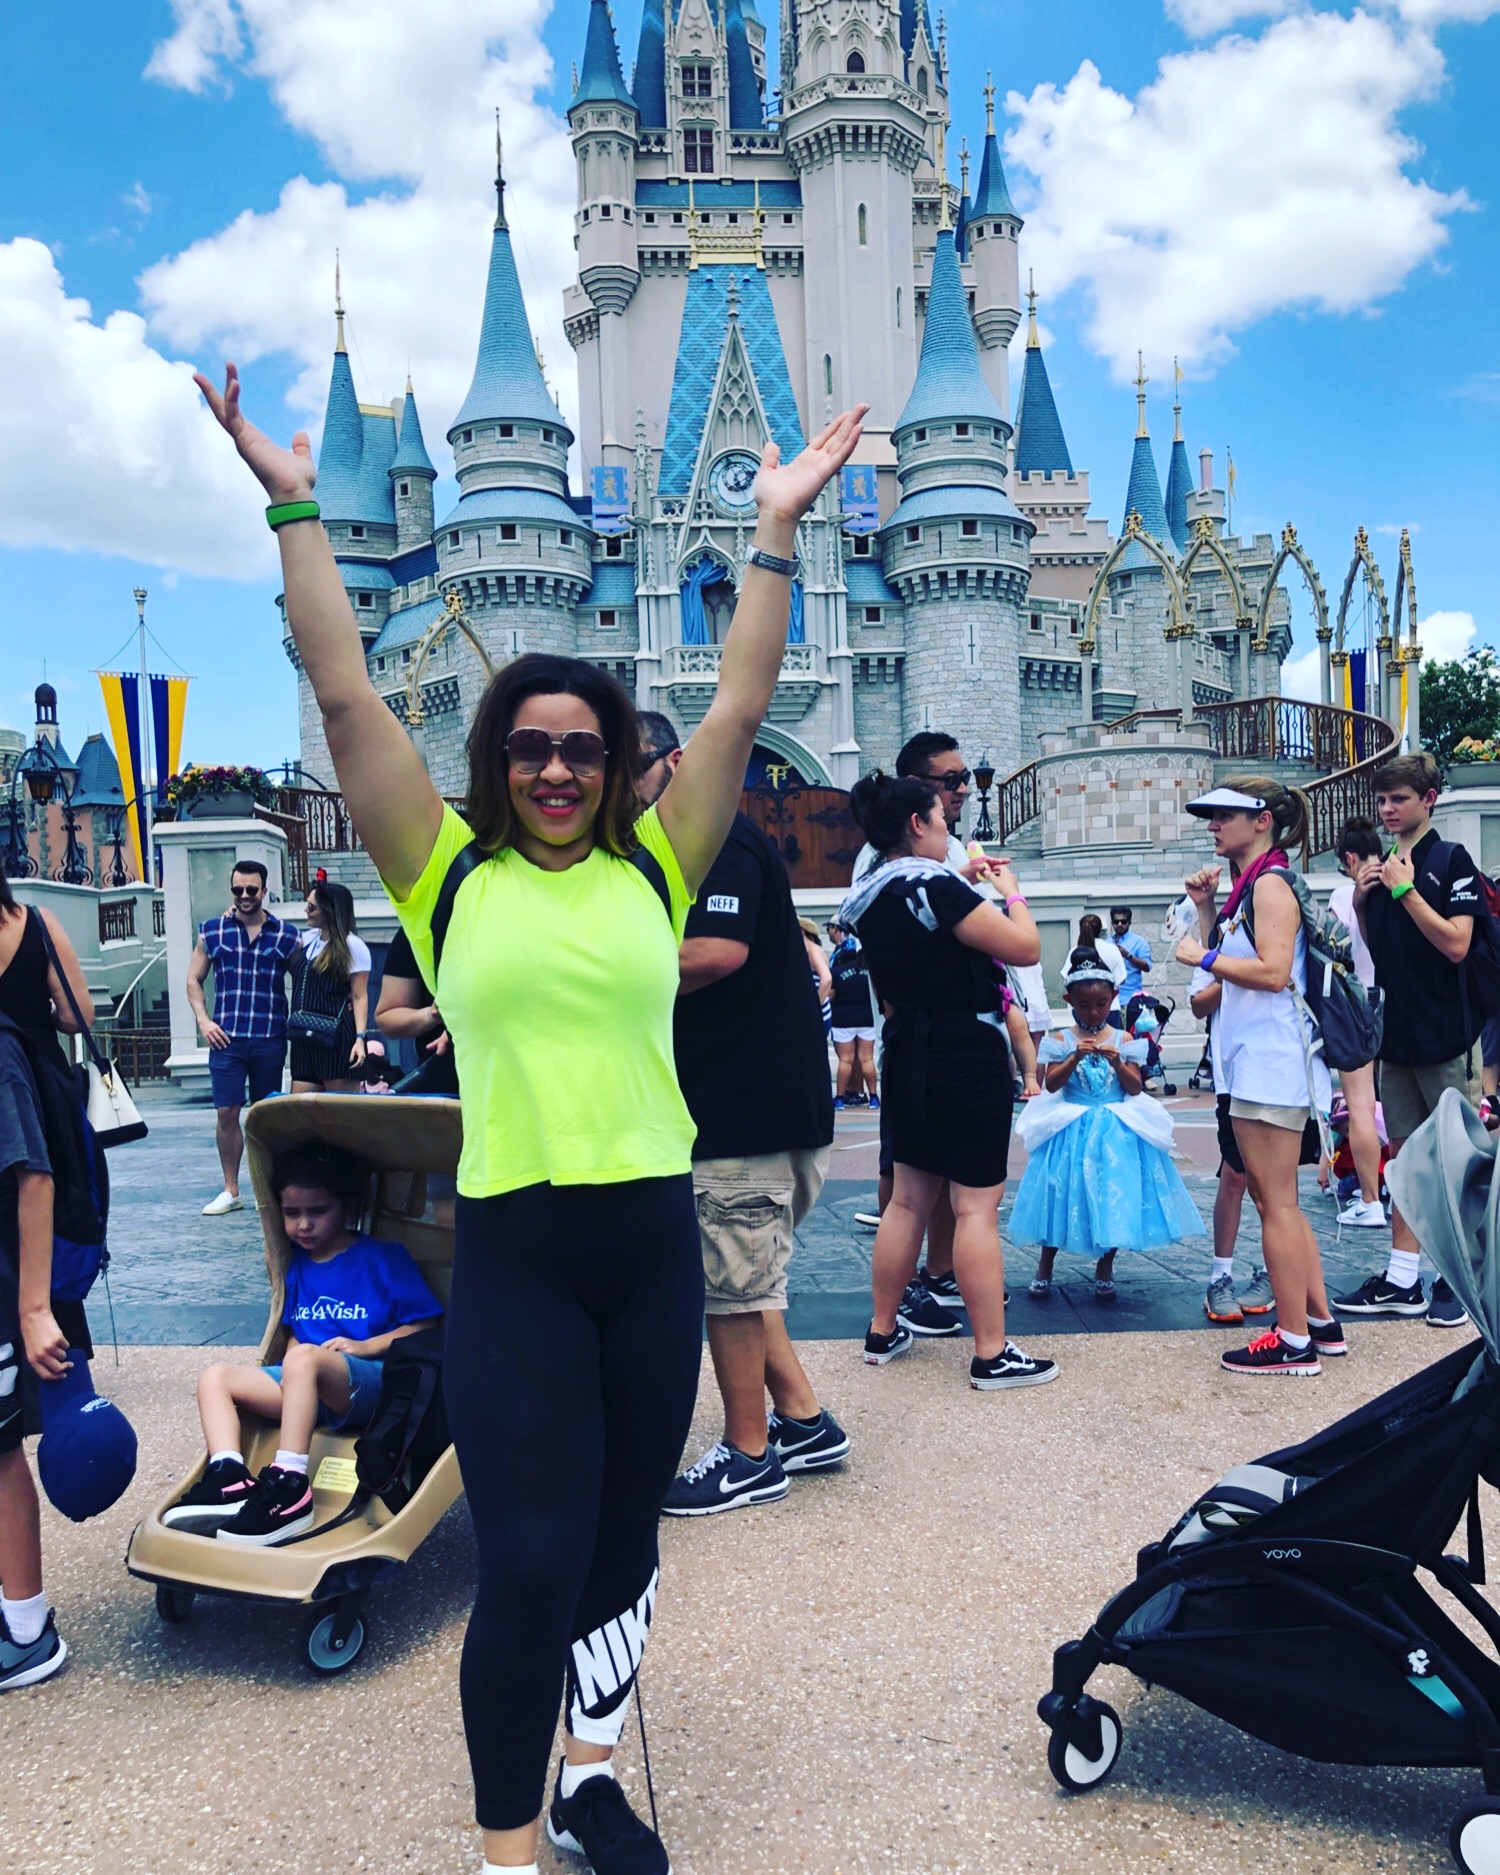 Photo of LMS in a neon yellow top and Nike tights, hands raised in front of Cinderella castle at DisneyWorld.